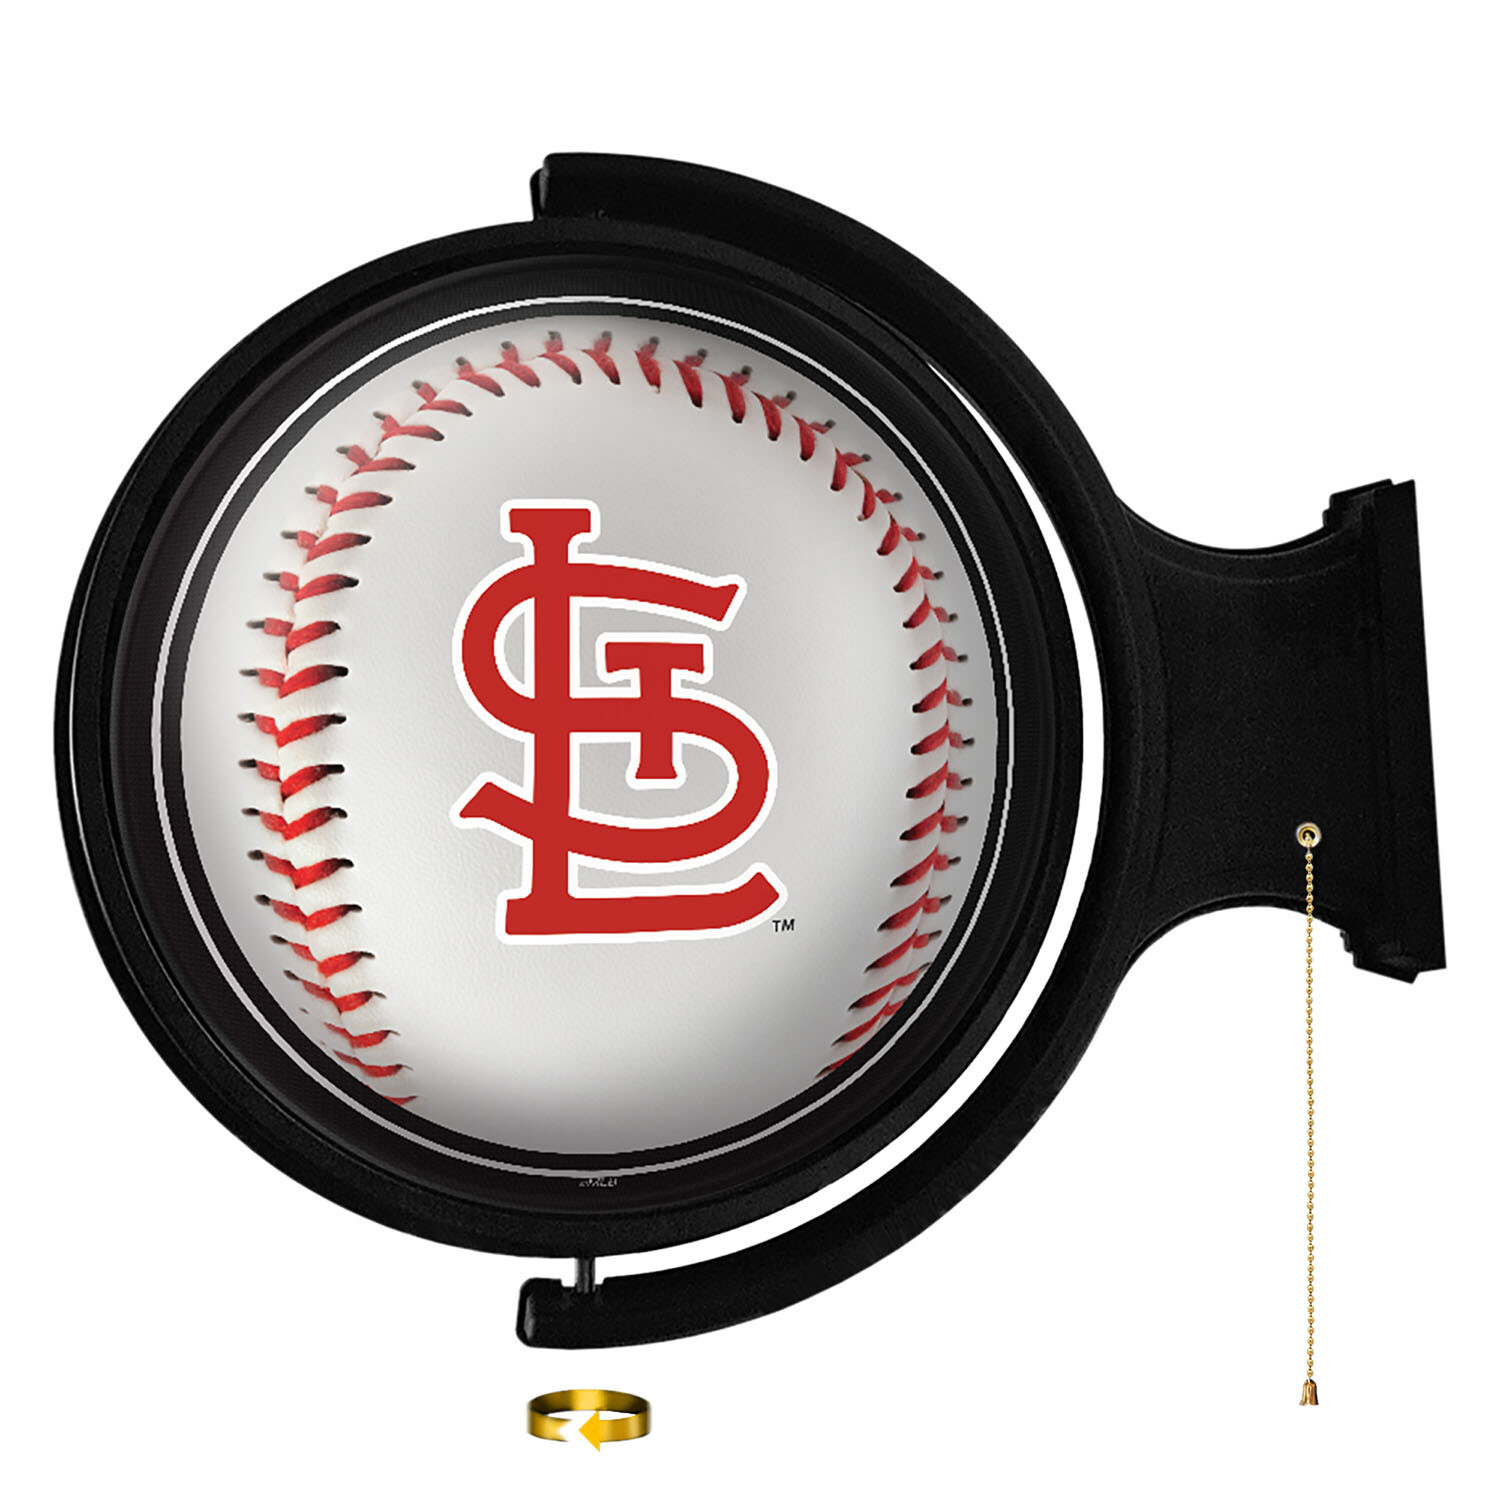 St. Louis Cardinals // Round Rotating Lighted Wall Sign (Original) - The  Fan Brand Illuminated Wall Signs - Touch of Modern